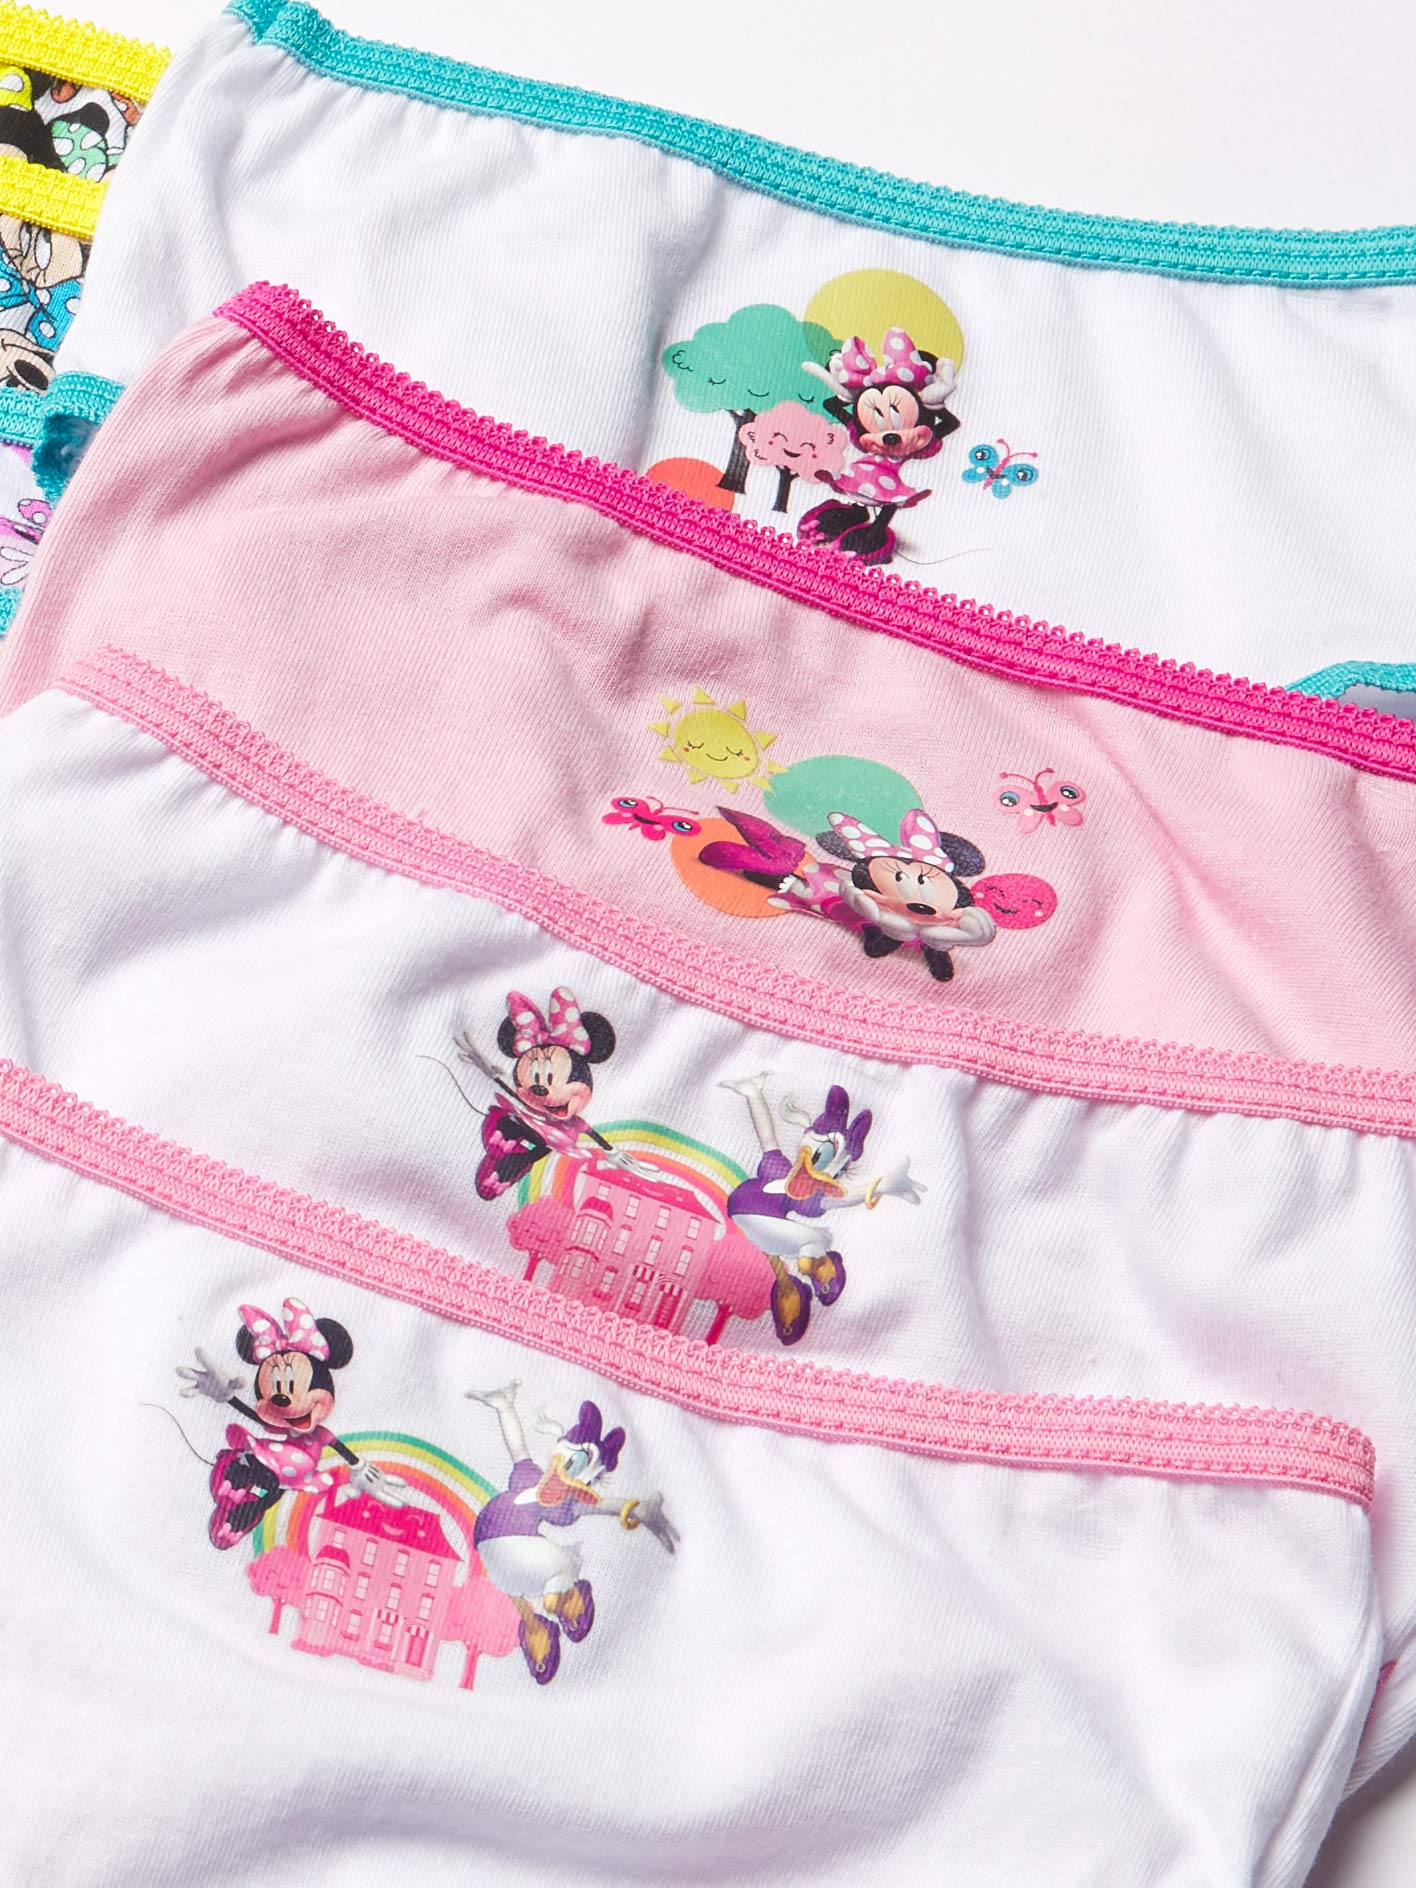 Buy Disney Girls' Minnie Mouse Underwear Multipacks with Assorted Prints in  Sizes 2/3t, 4t, 4, 6, 8 and 10